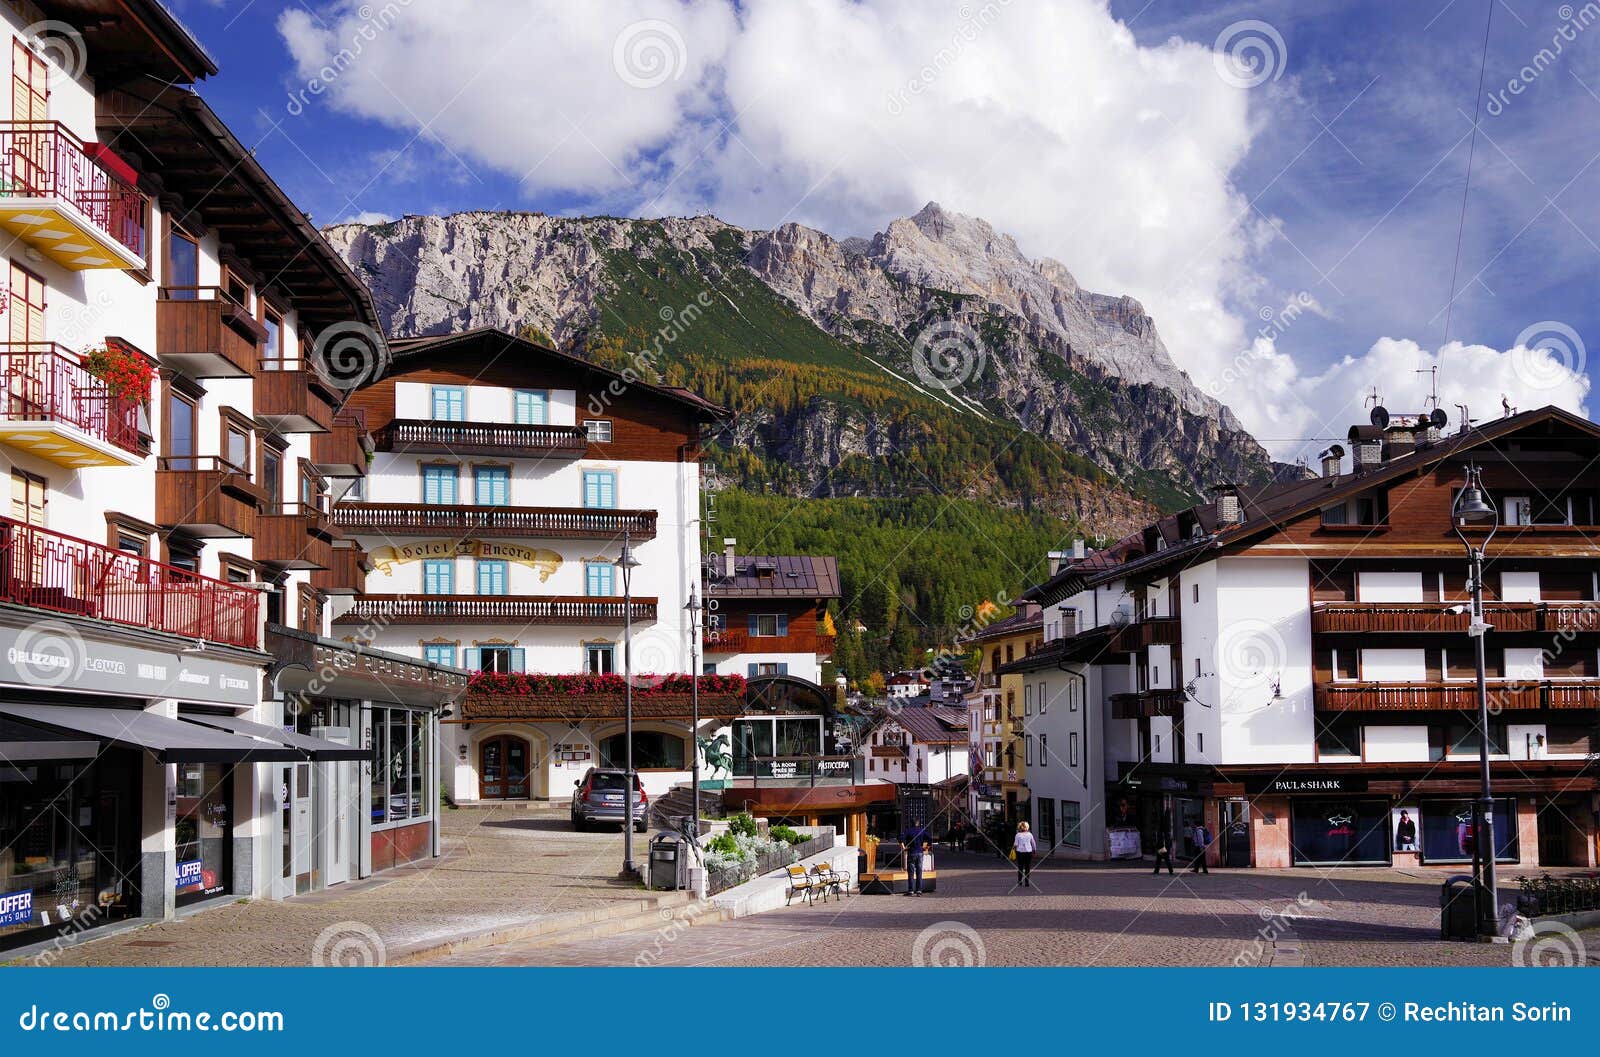 Cortina D Ampezzo Italy 18 October 2018 Cityscape Of Cortina D Ampezzo The Famous Resort In The Dolomites Editorial Photography Image Of Cityscape Landscape 131934767